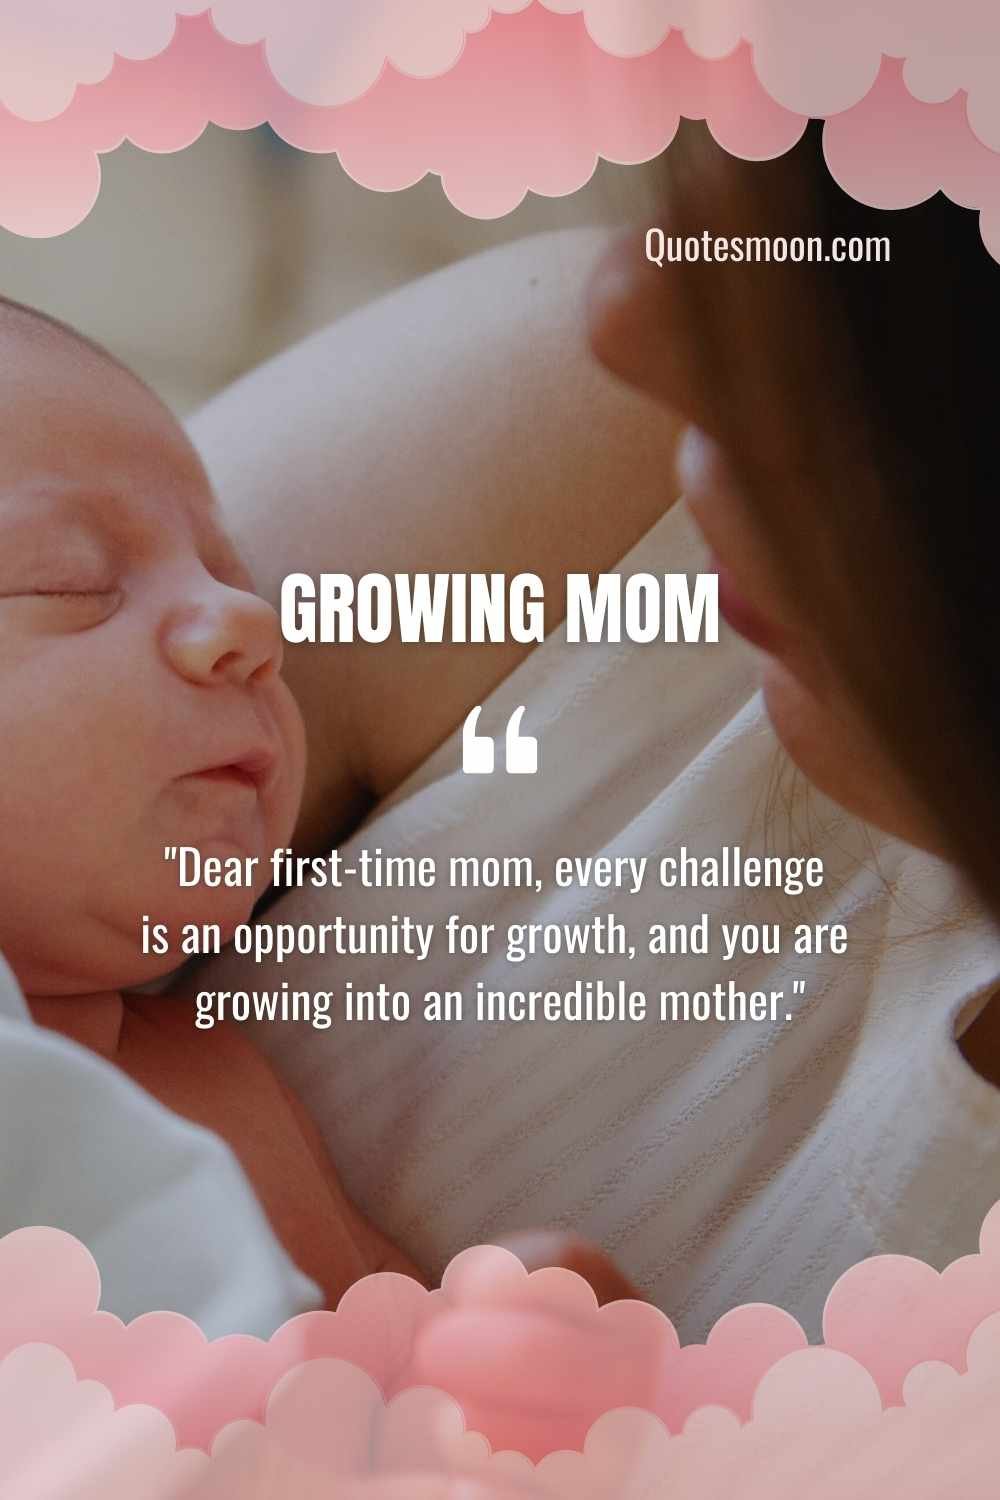 
quotes about becoming a mother for the first time with photos